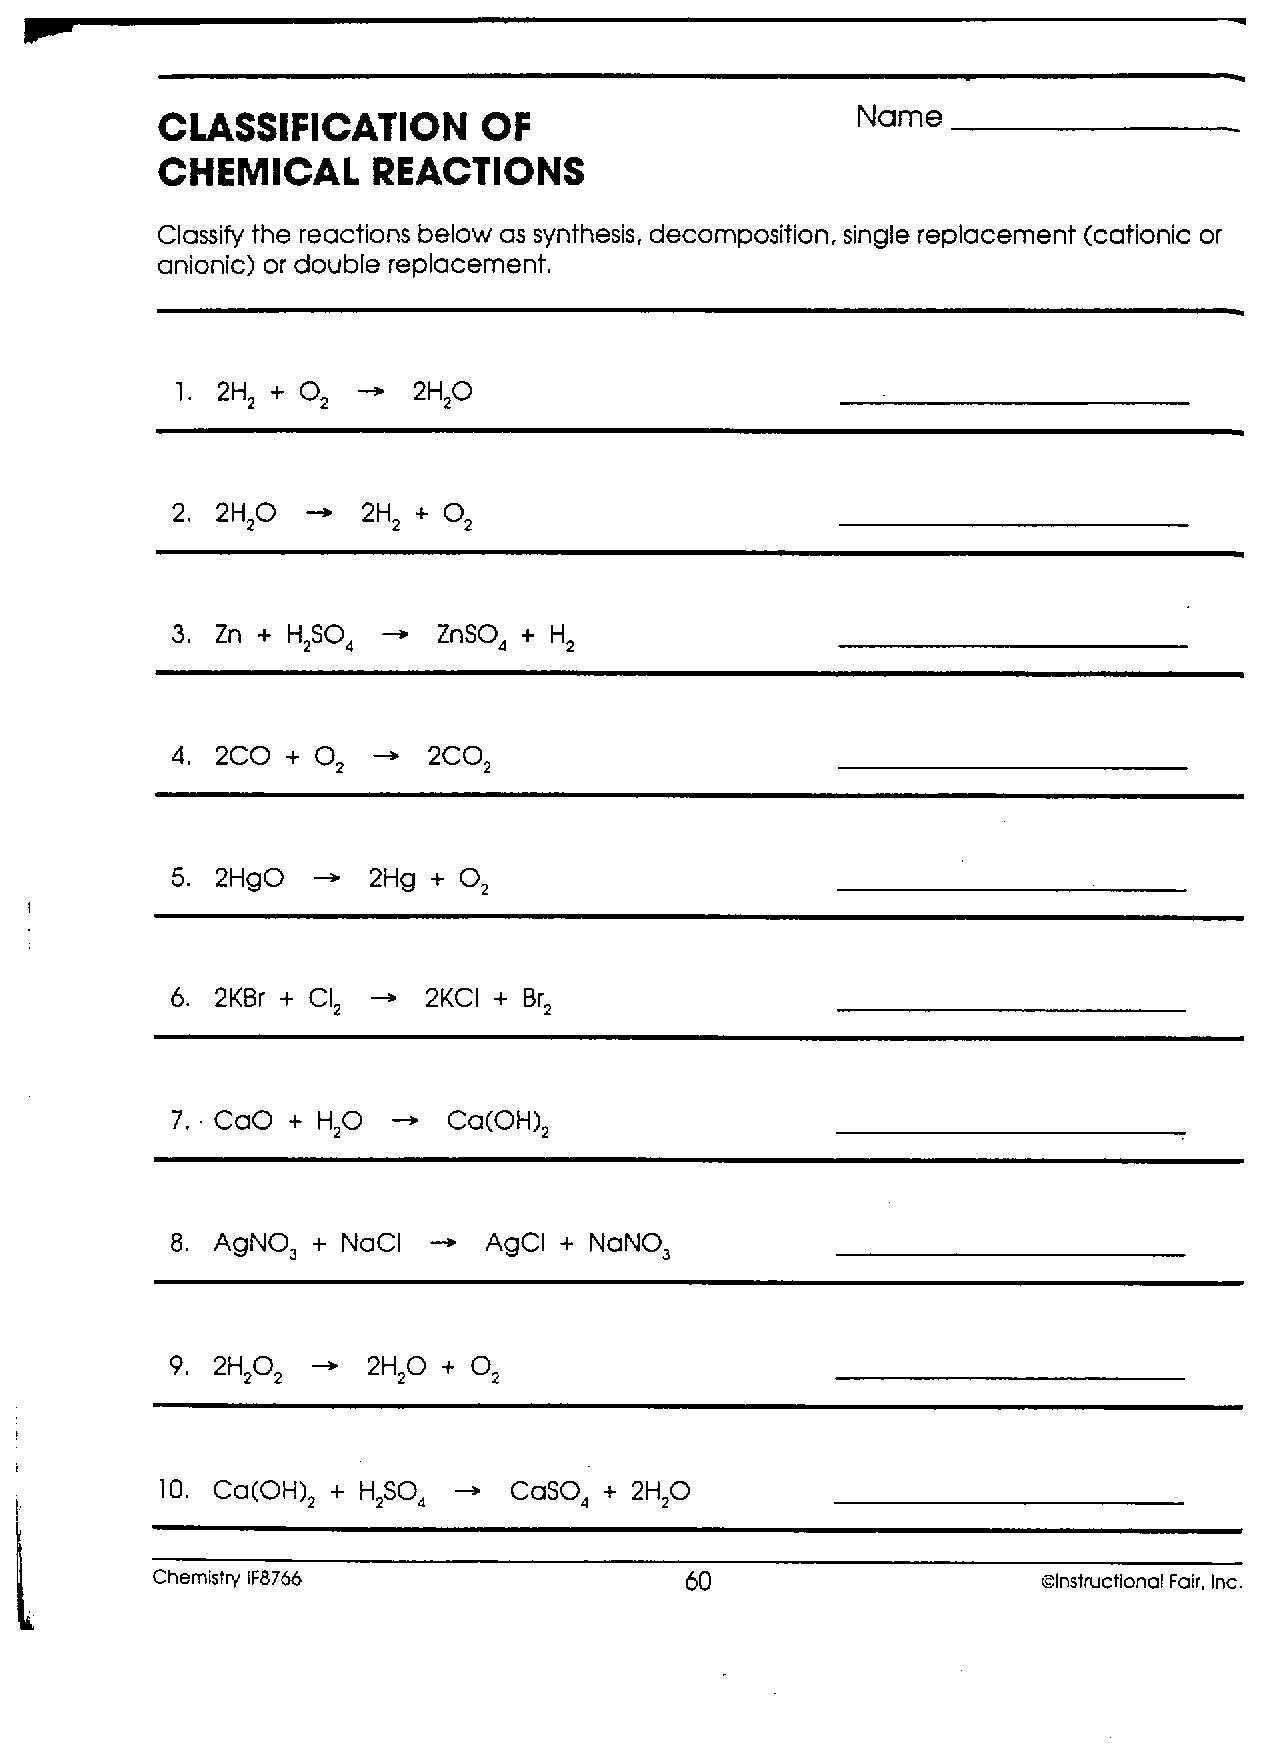 Chemical Reaction Worksheet Answers or Classification Chemical Reactions Worksheet Answers New Dc Heath